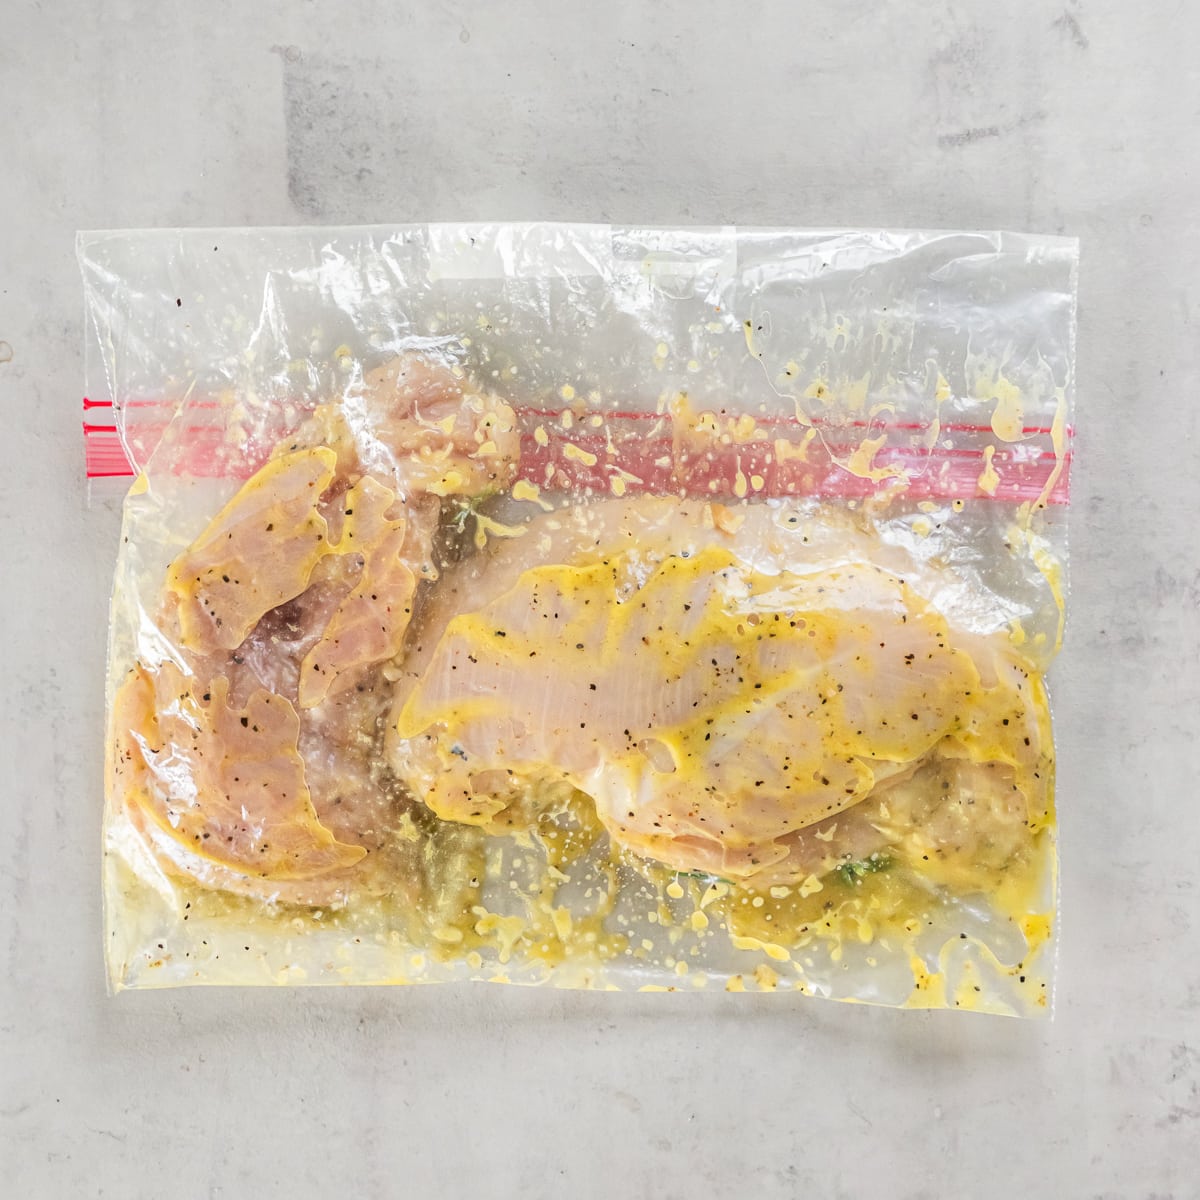 Chicken and marinade in a gallon size zippered plastic storage bag.